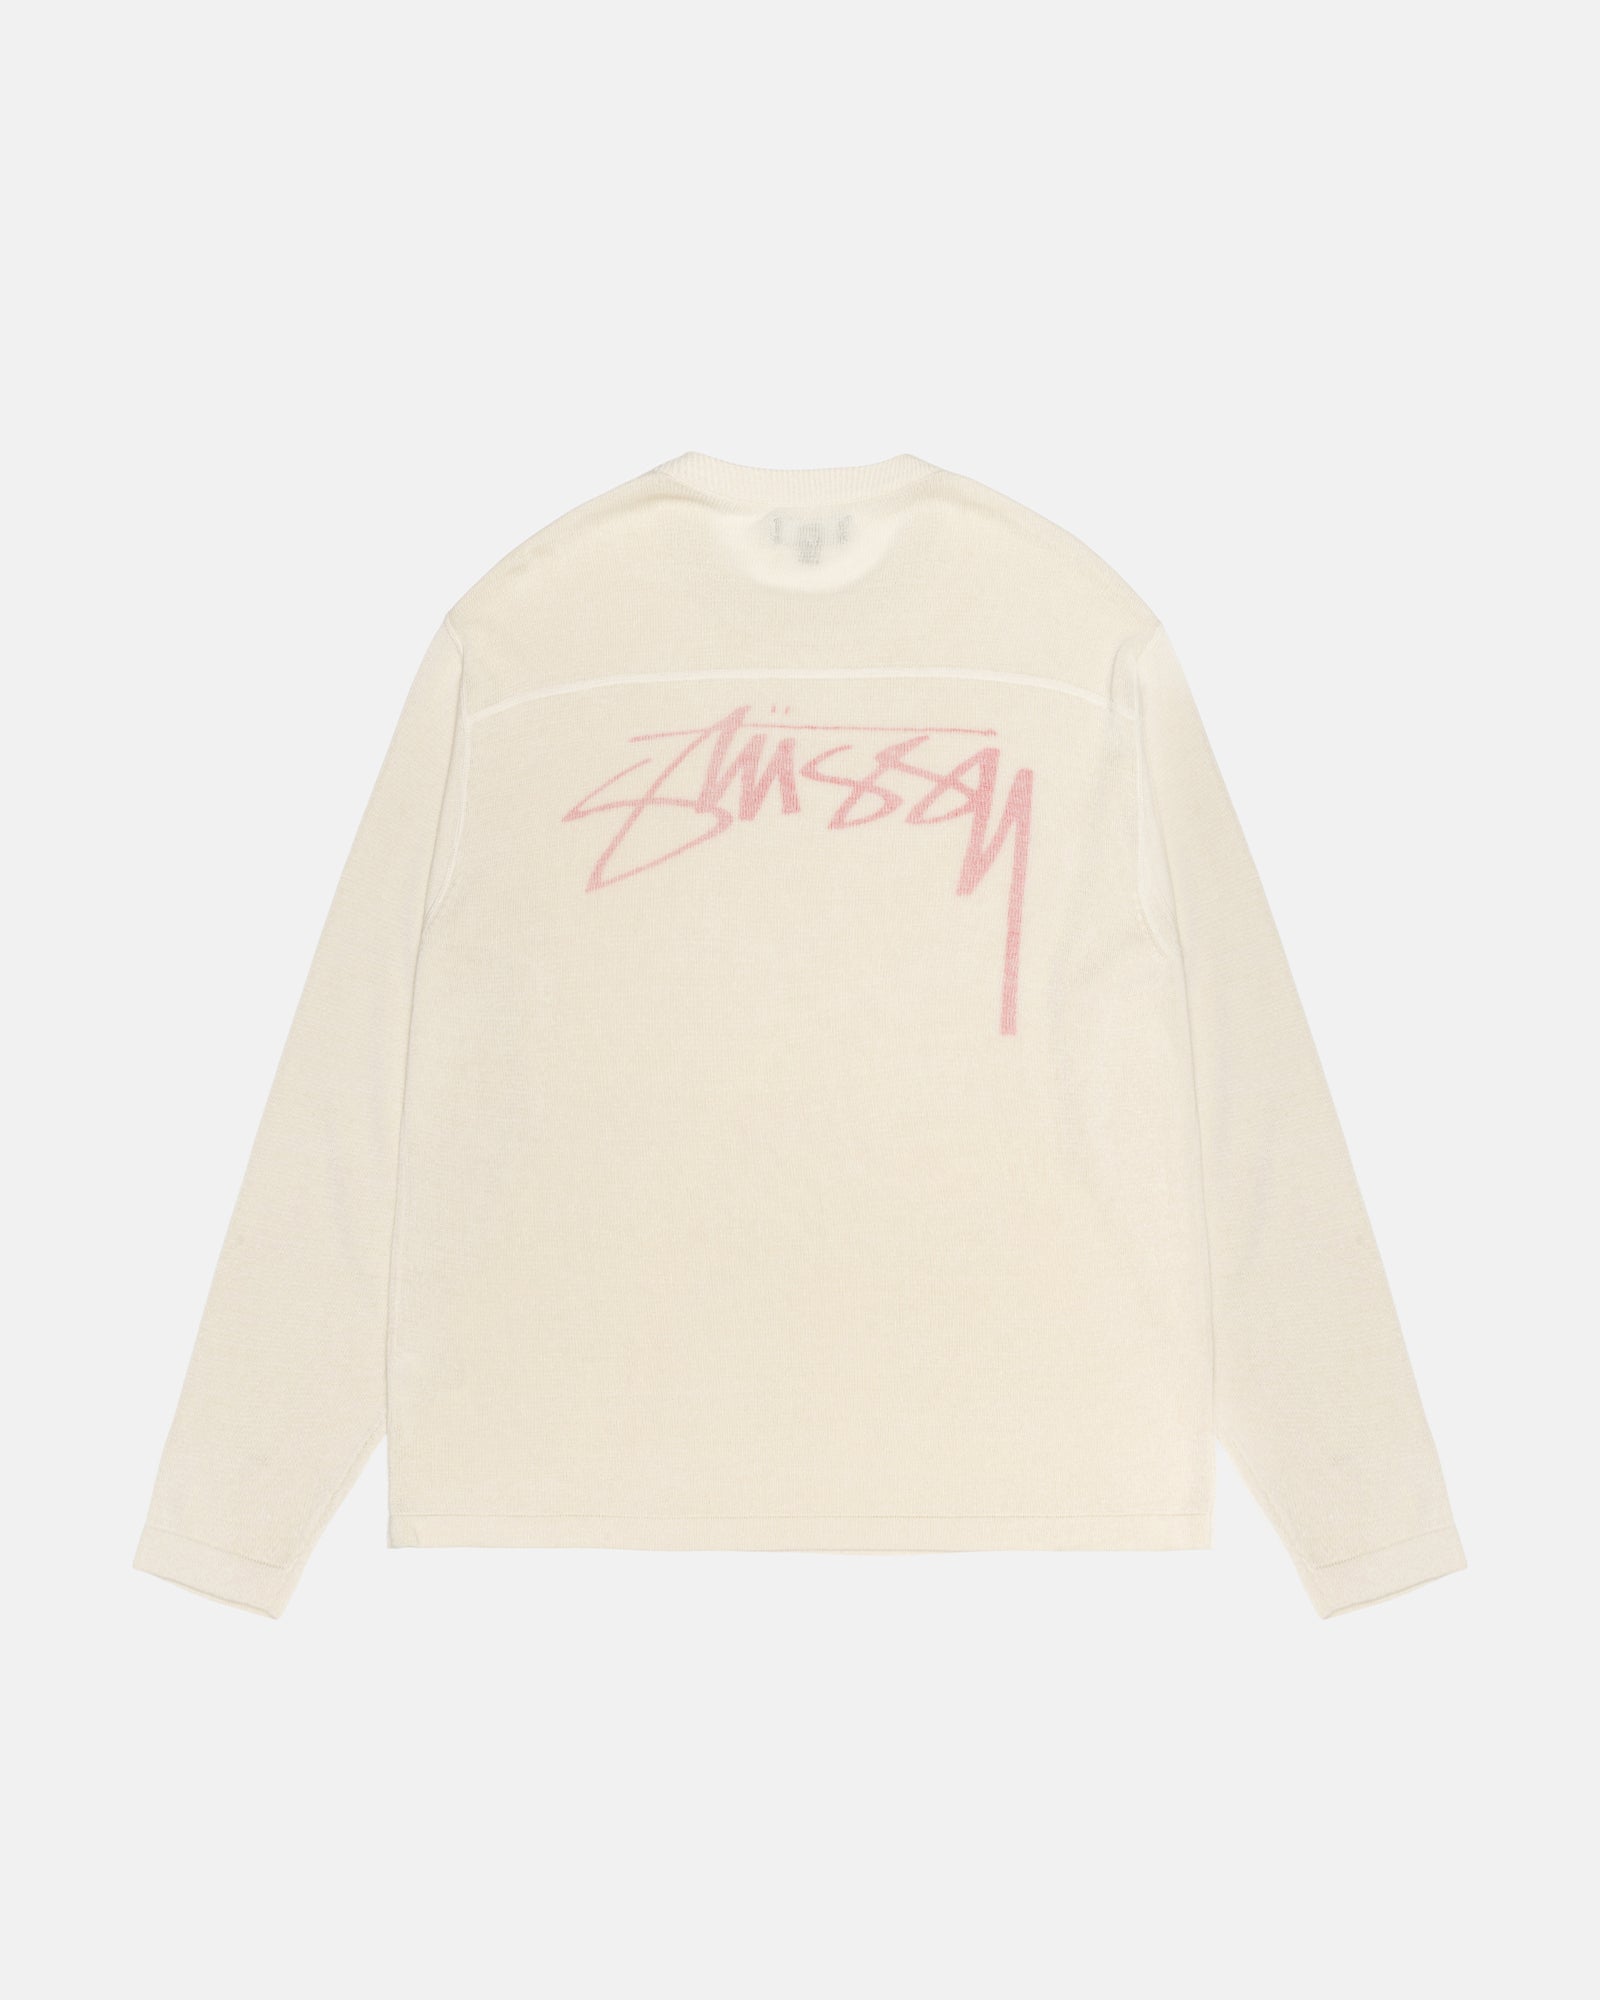 New Arrivals: Hoodies, Beanies, Jackets & More – Stüssy Europe